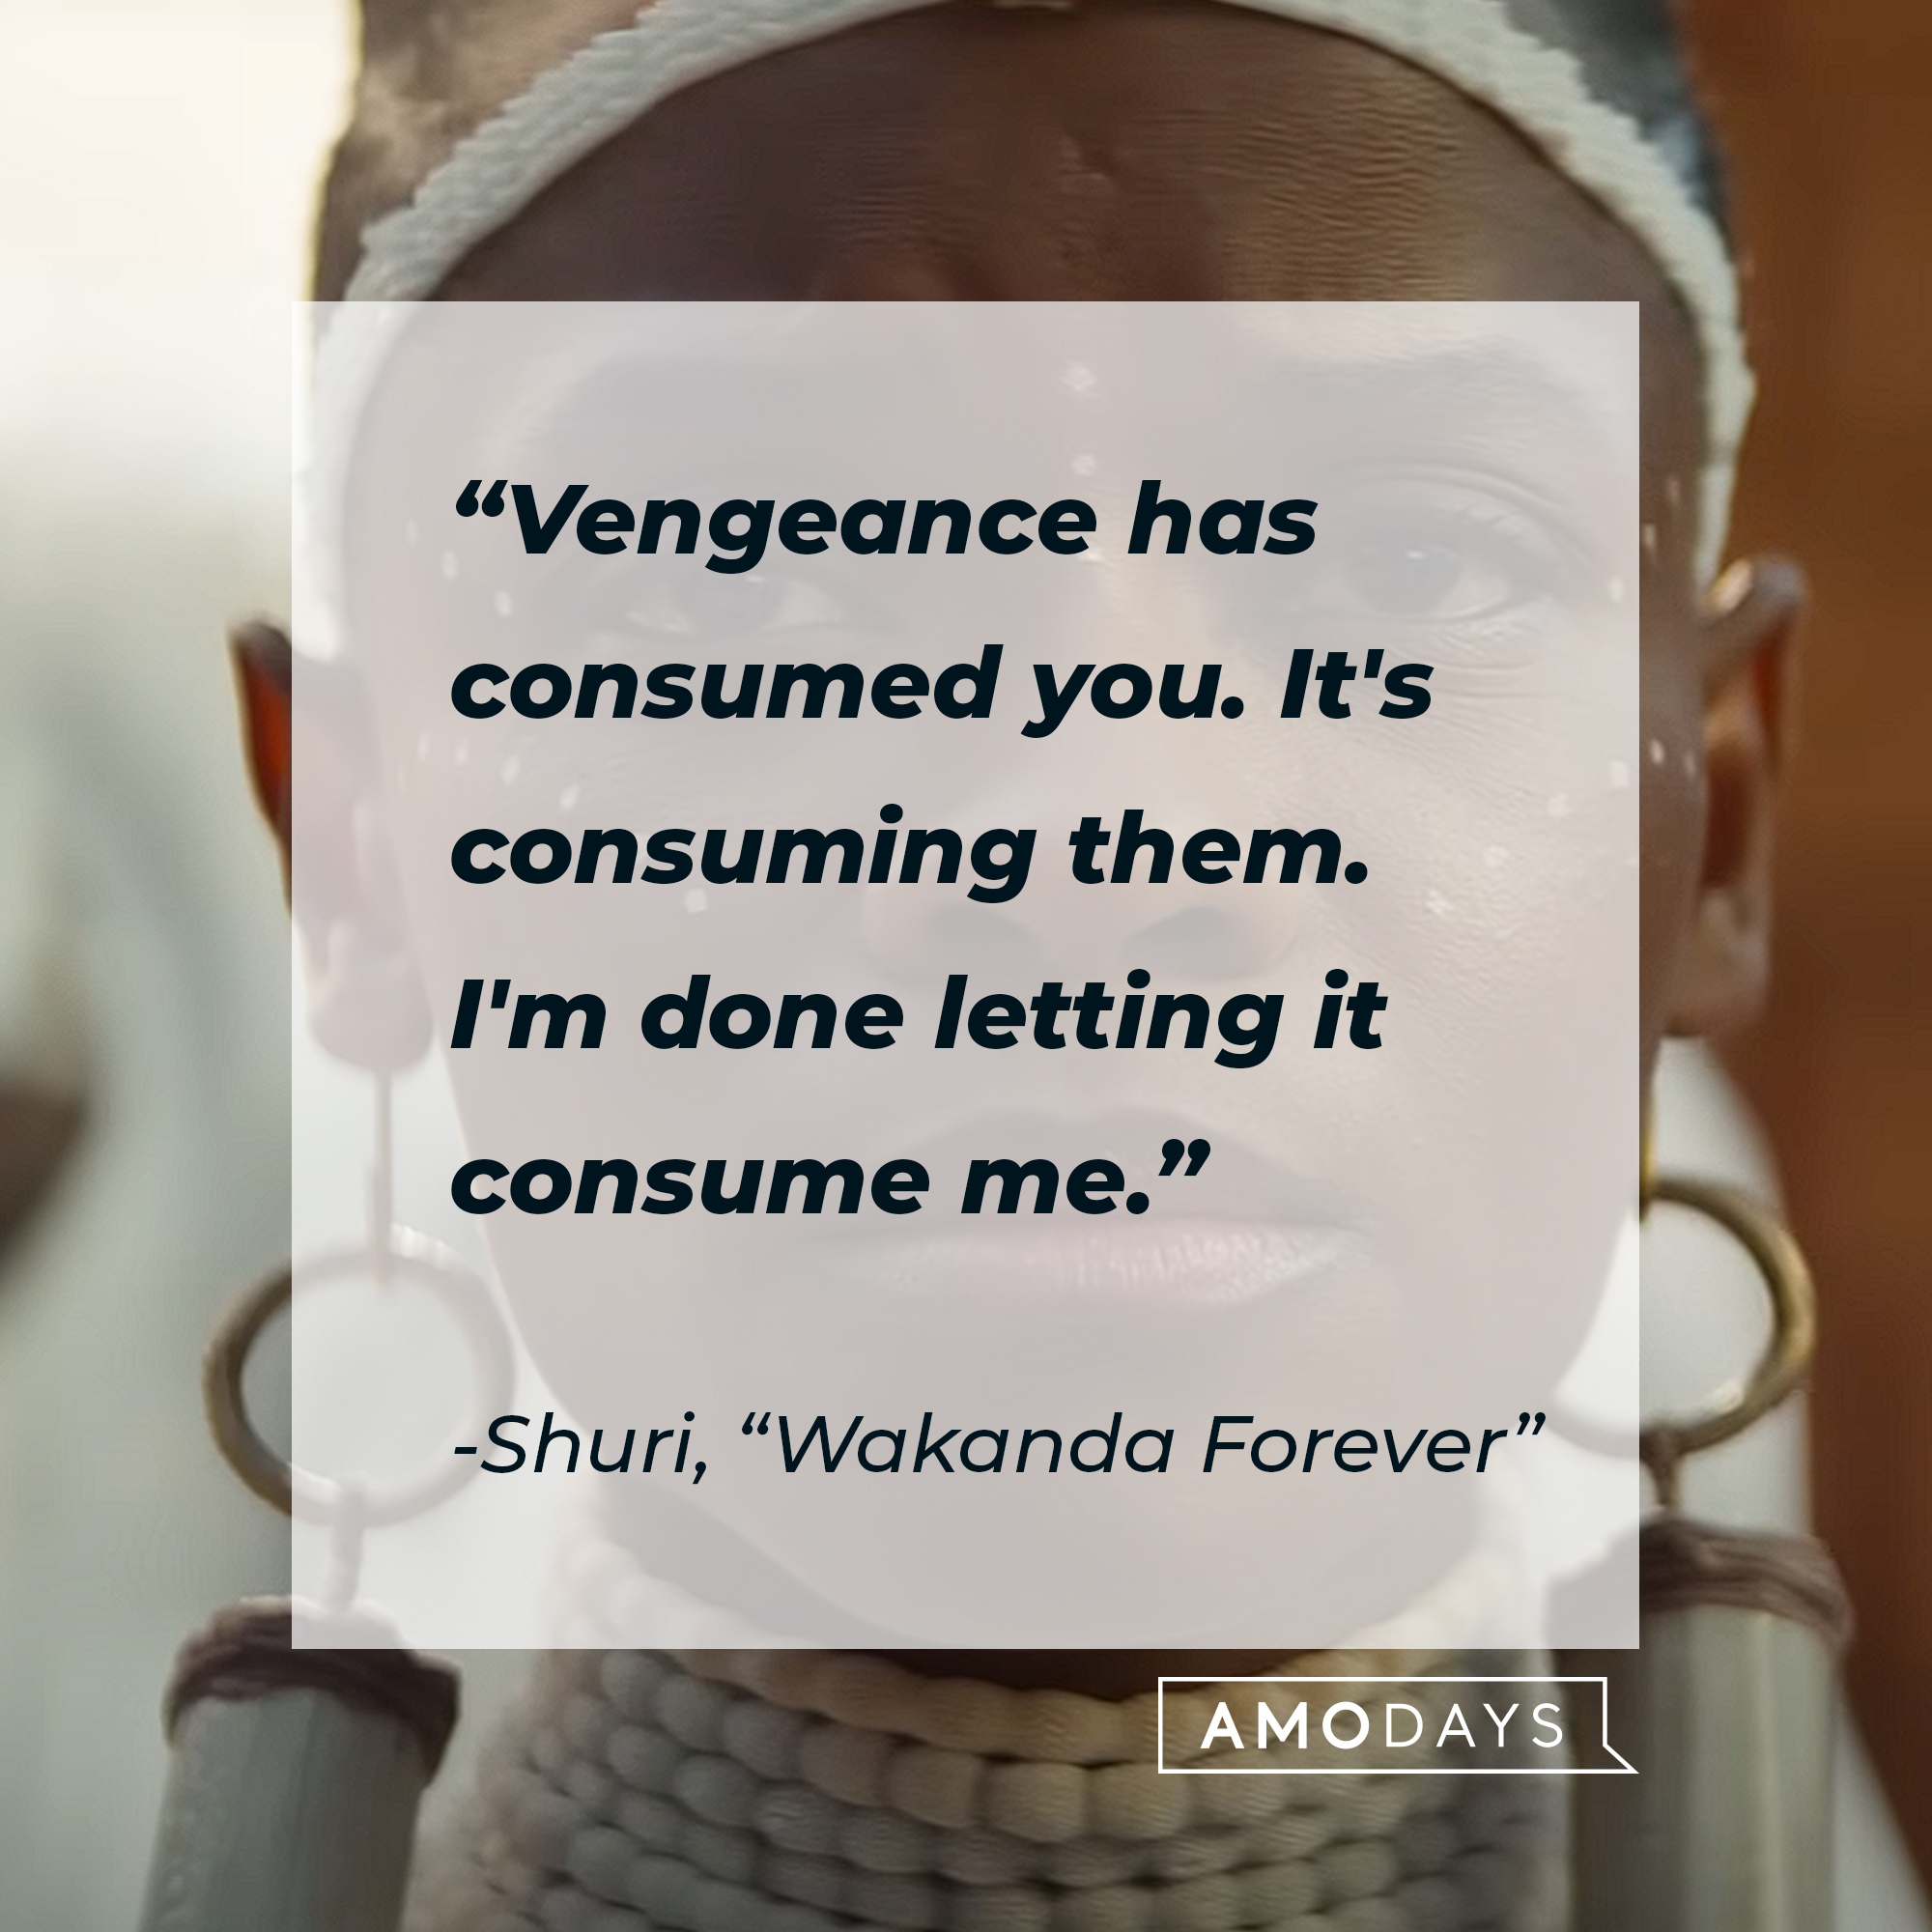 Shuri's quote from "Wakanda Forever:" "Vengeance has consumed you. it's consuming them. I'm done letting it consume me." | Source: Youtube.com/marvel